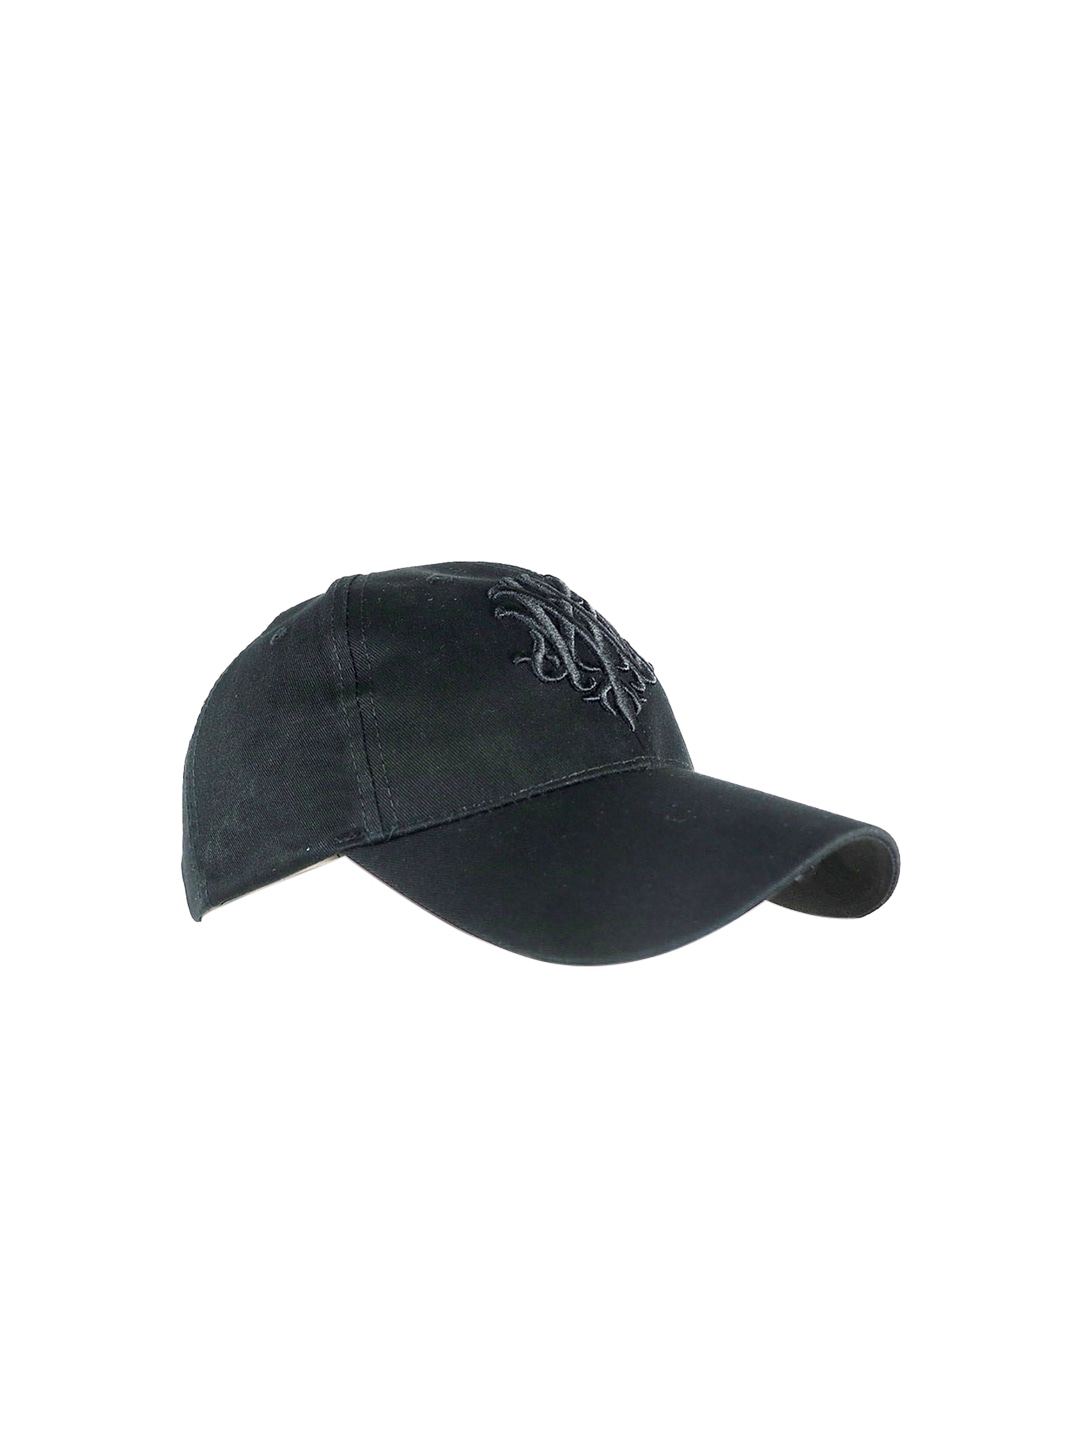 Accessories Caps | iSWEVEN Unisex Black & Grey Embroidered Snapback Cap - QD64134